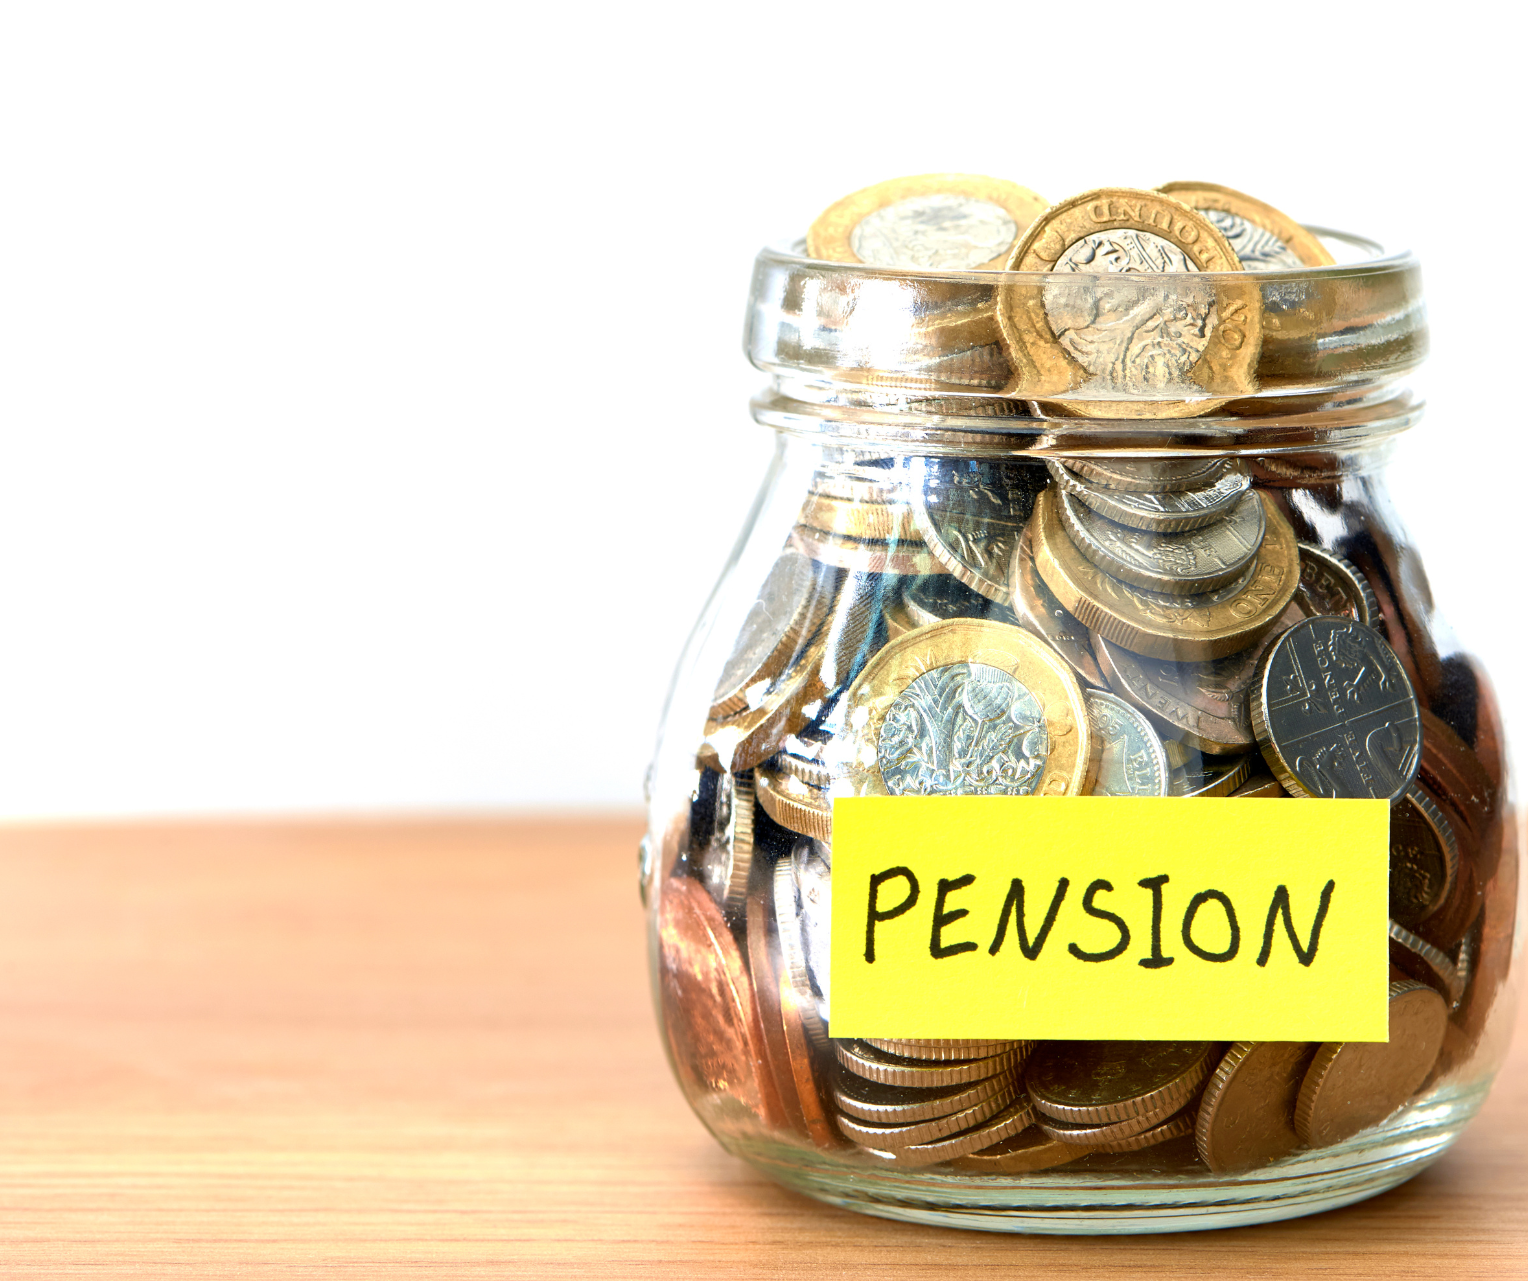 Is there a timeframe in which my ex spouse can make a claim against my pension?